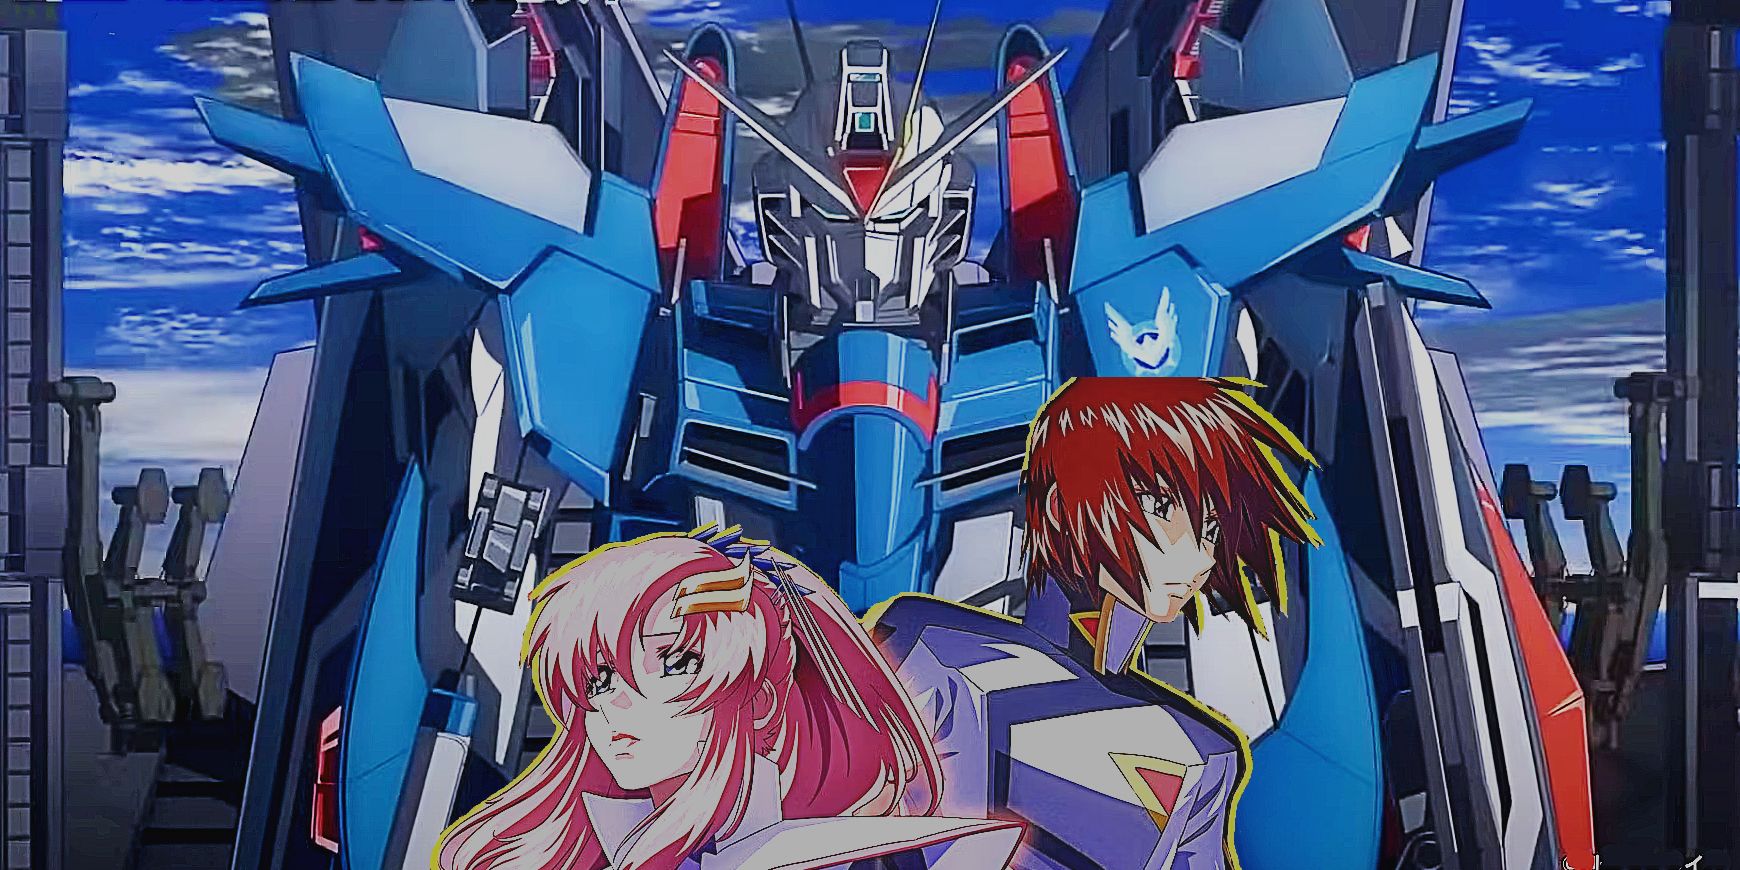 Kira and Lacus in front of the Mobile Suit Freedom in Gundam SEED Freedom.